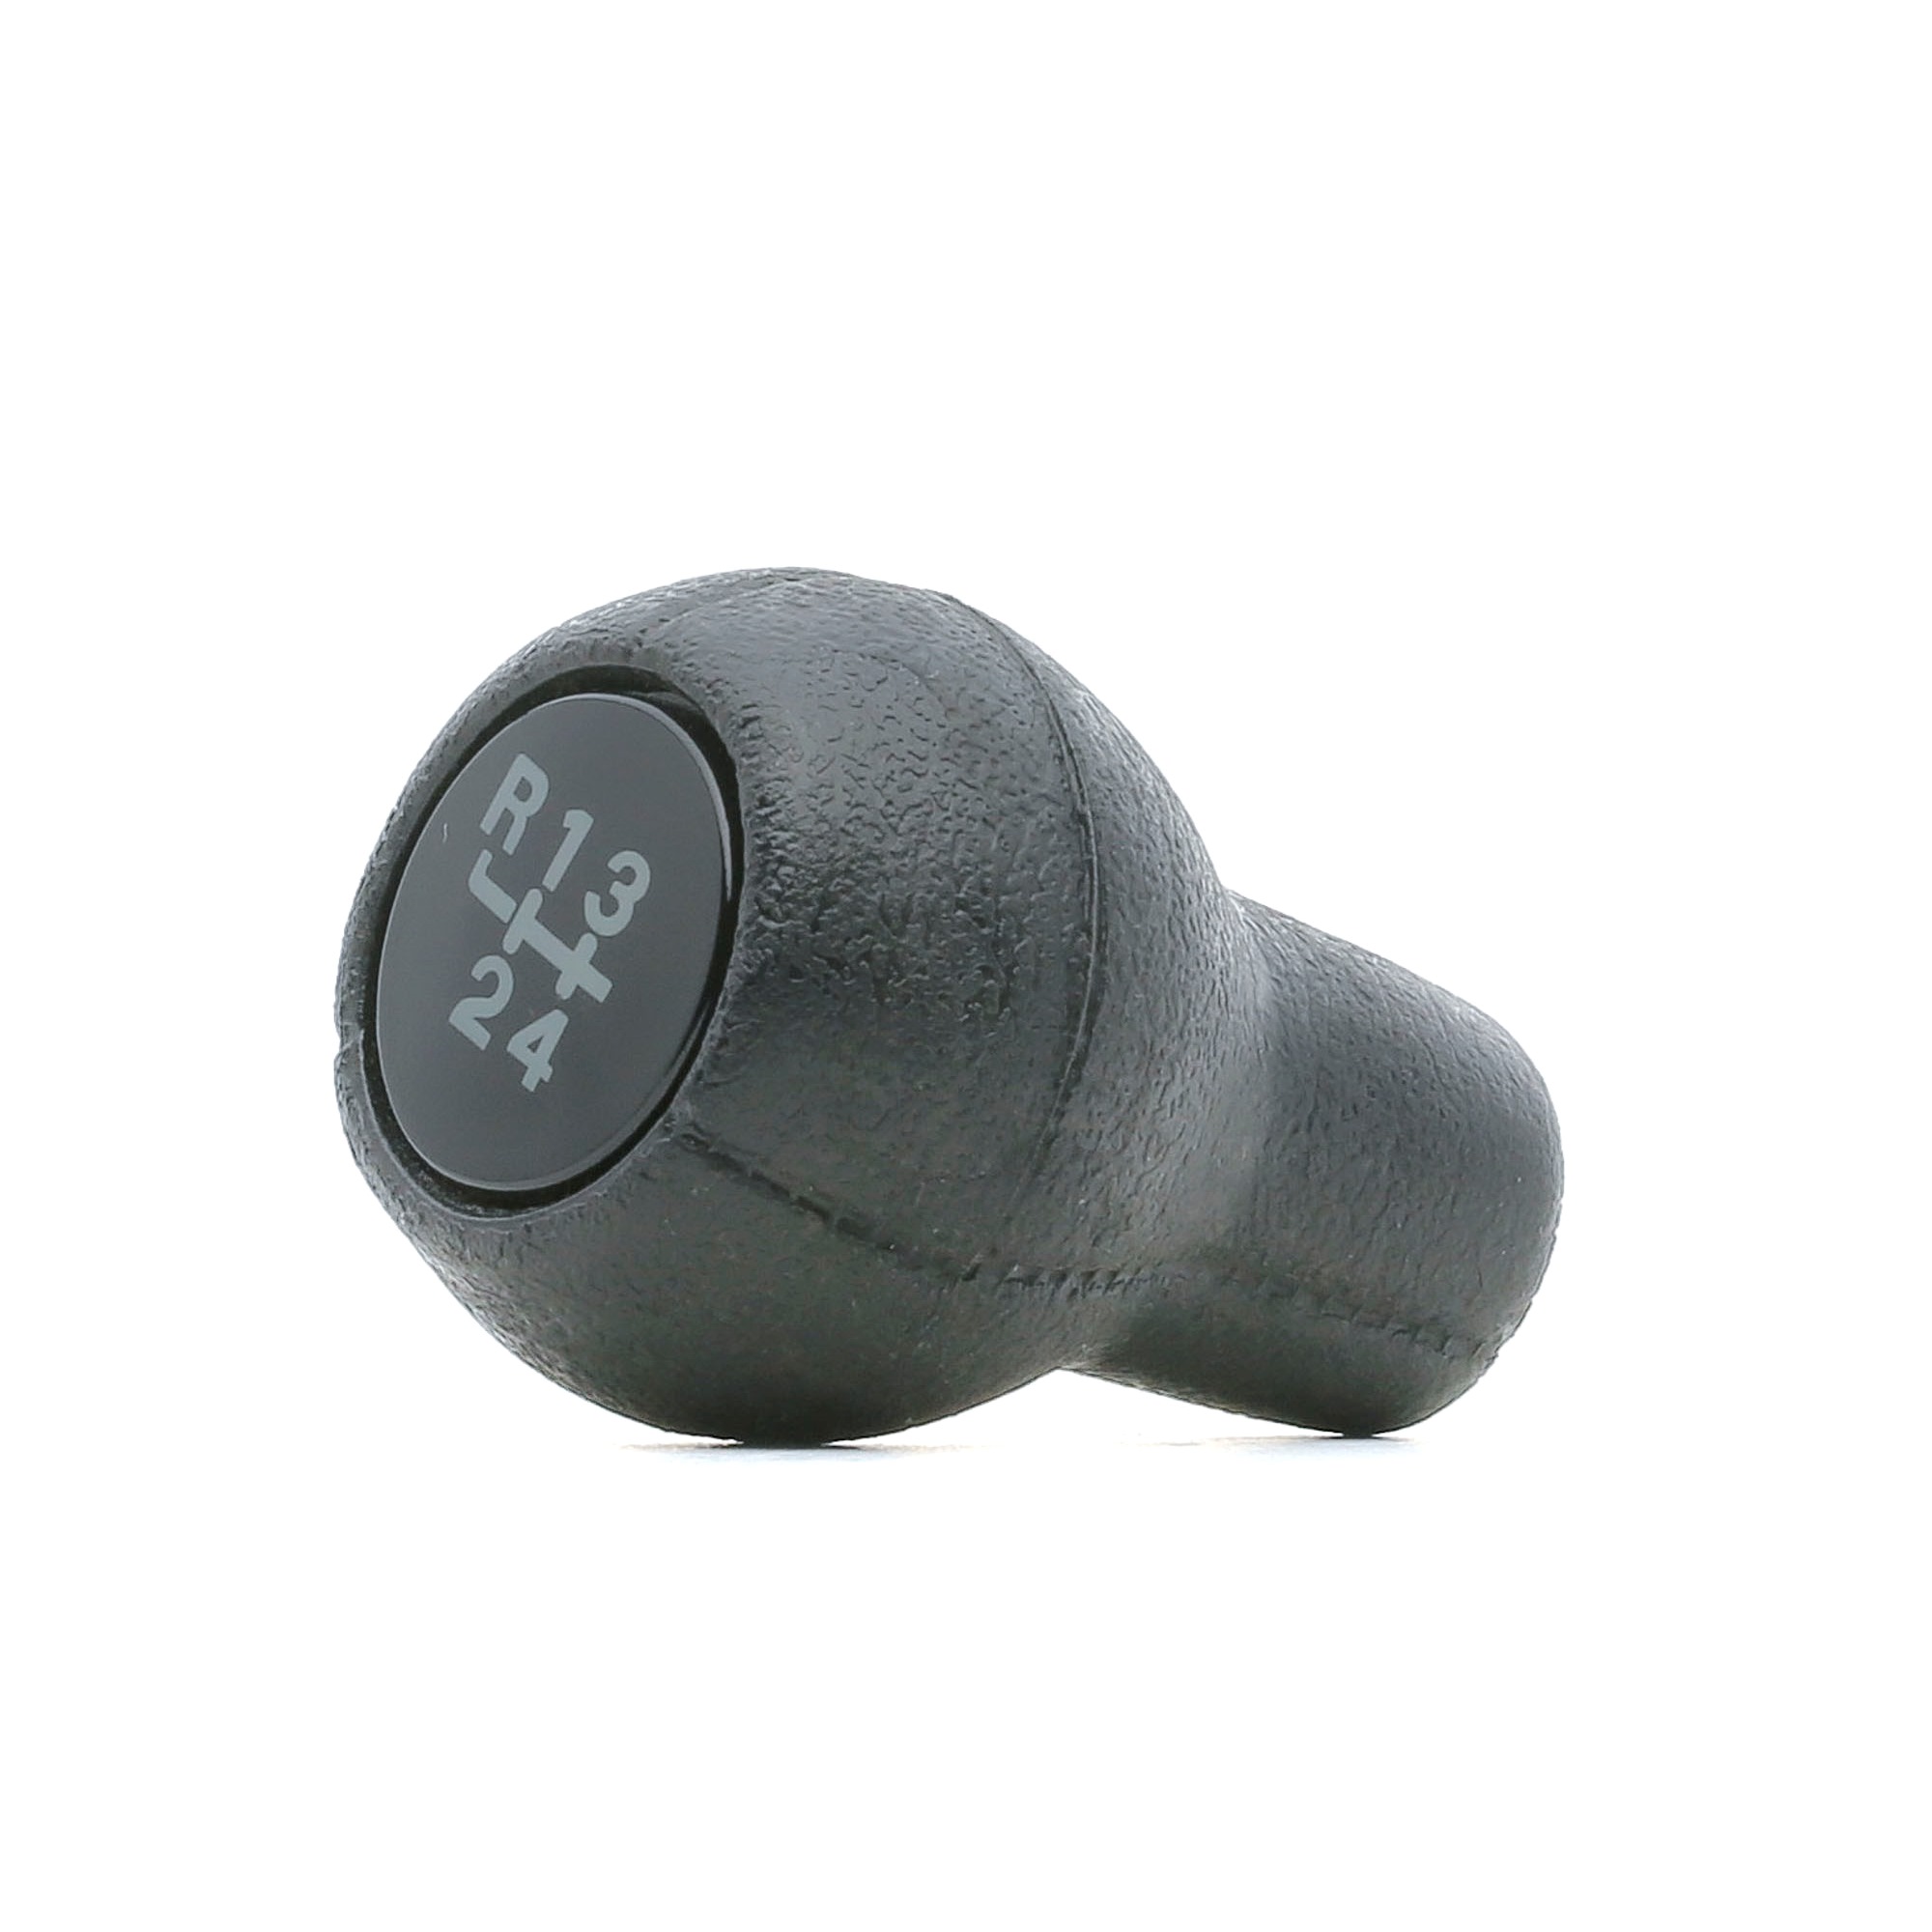 AUTOMEGA 100008010 Gear knob VW experience and price